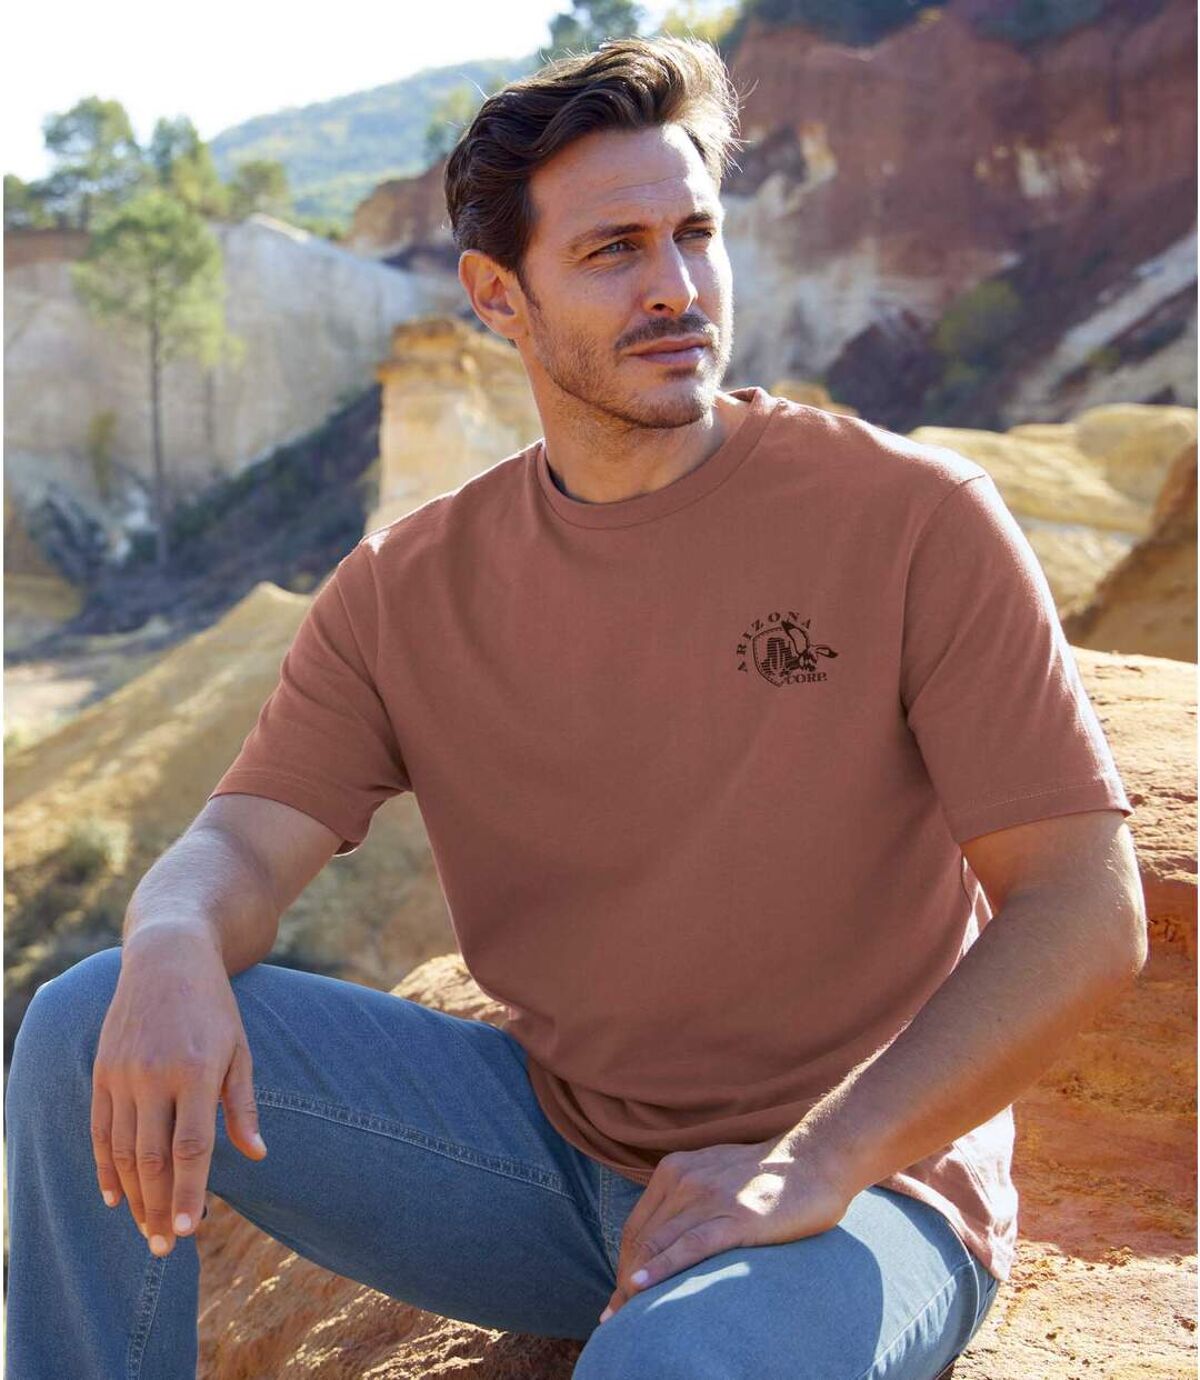 Pack of 4 Men's Outdoor T-Shirts - Yellow Taupe Black Terracotta Atlas For Men